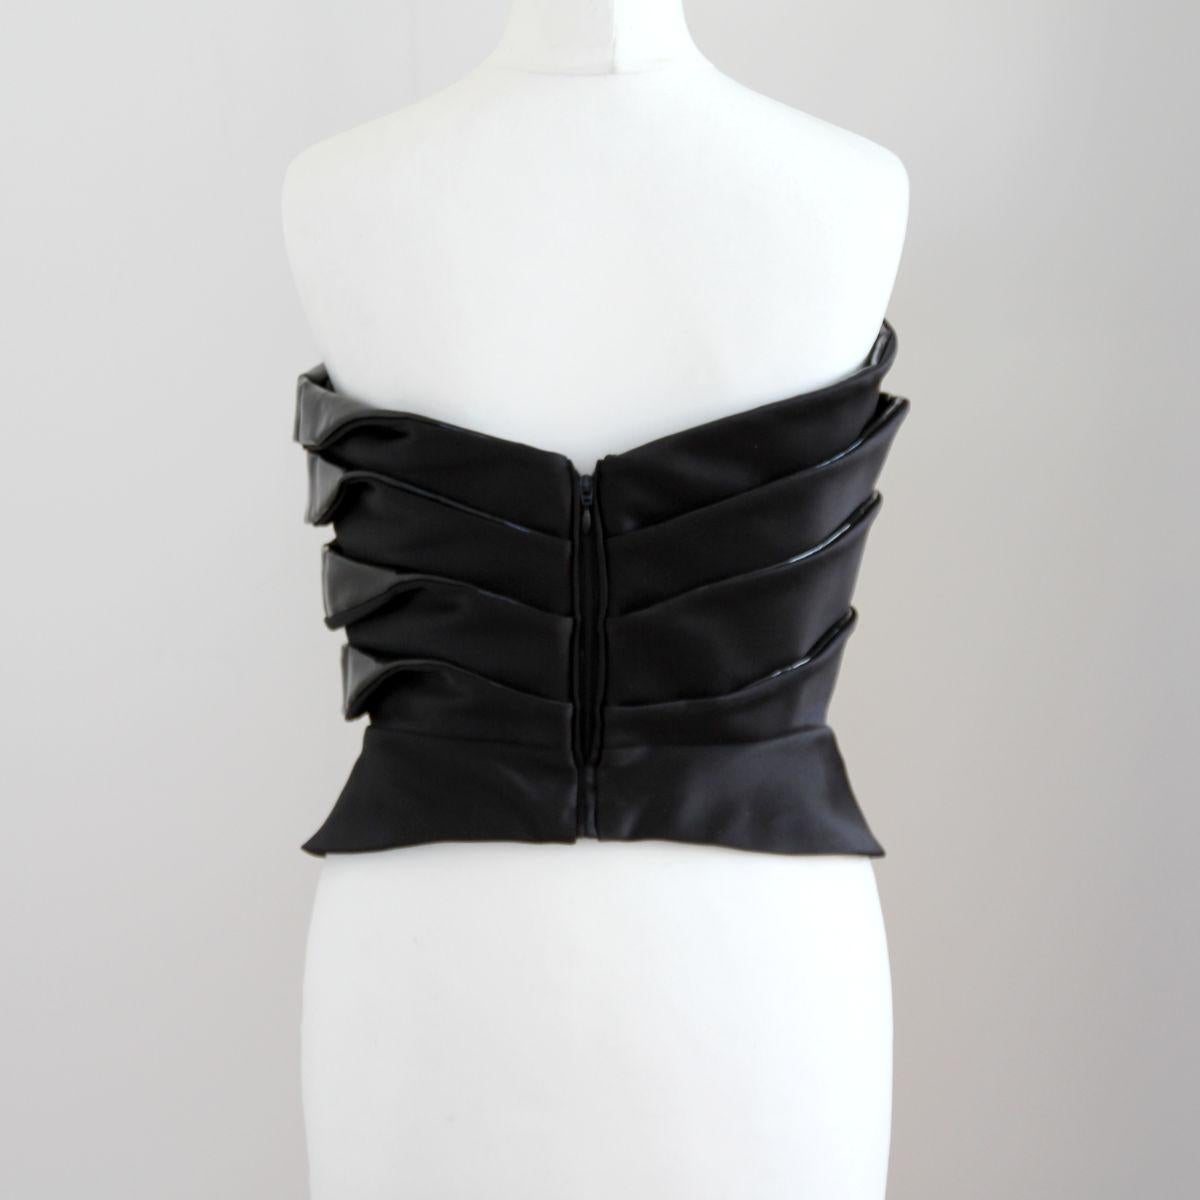 EMPORIO ARMANI

2010. Elegant black top / bustier with patent inserts from Emporio Armani.

The top is in very good condition (see photos).